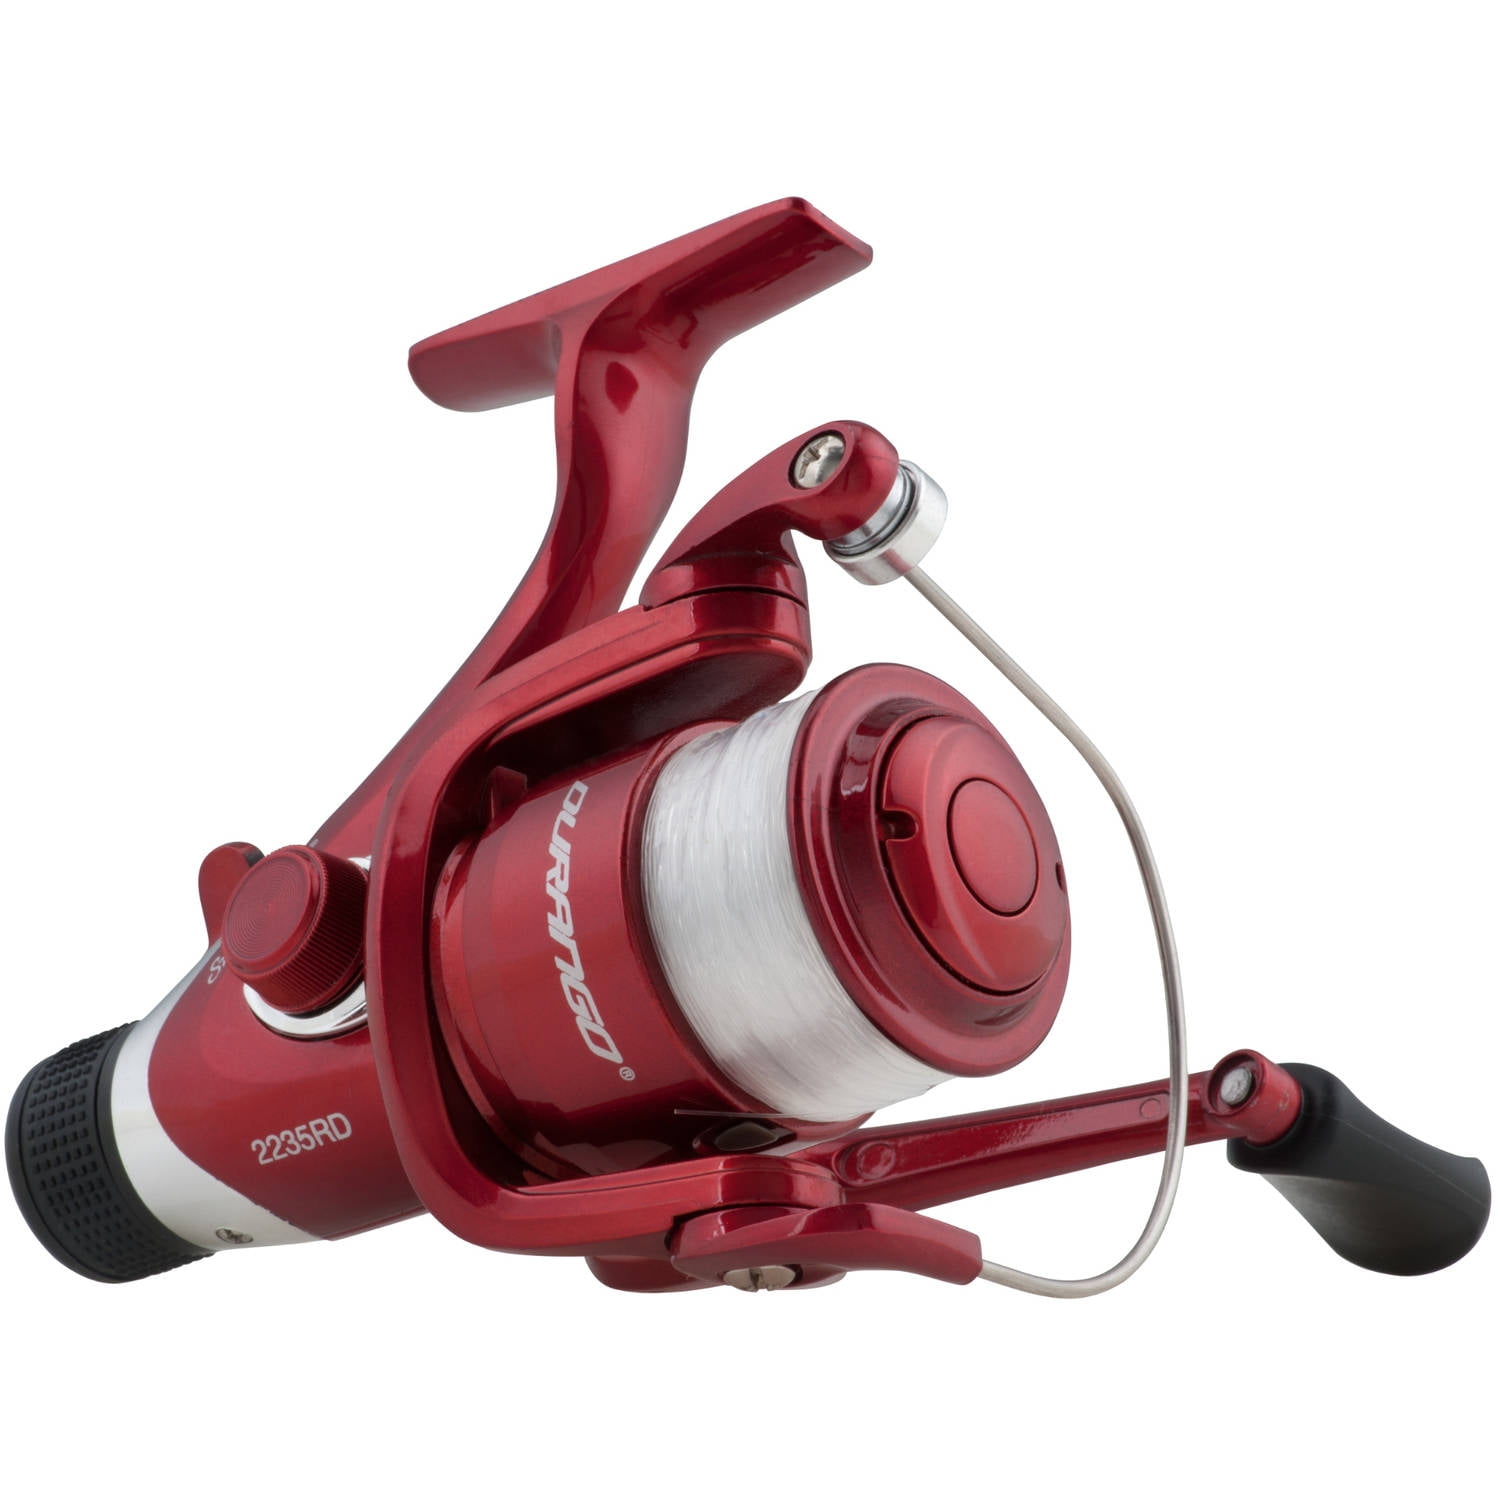 SHAKESPEARE DURANGO REAR Drag Spinning Reel 2235RD-Red. New without clam  pack. $15.50 - PicClick